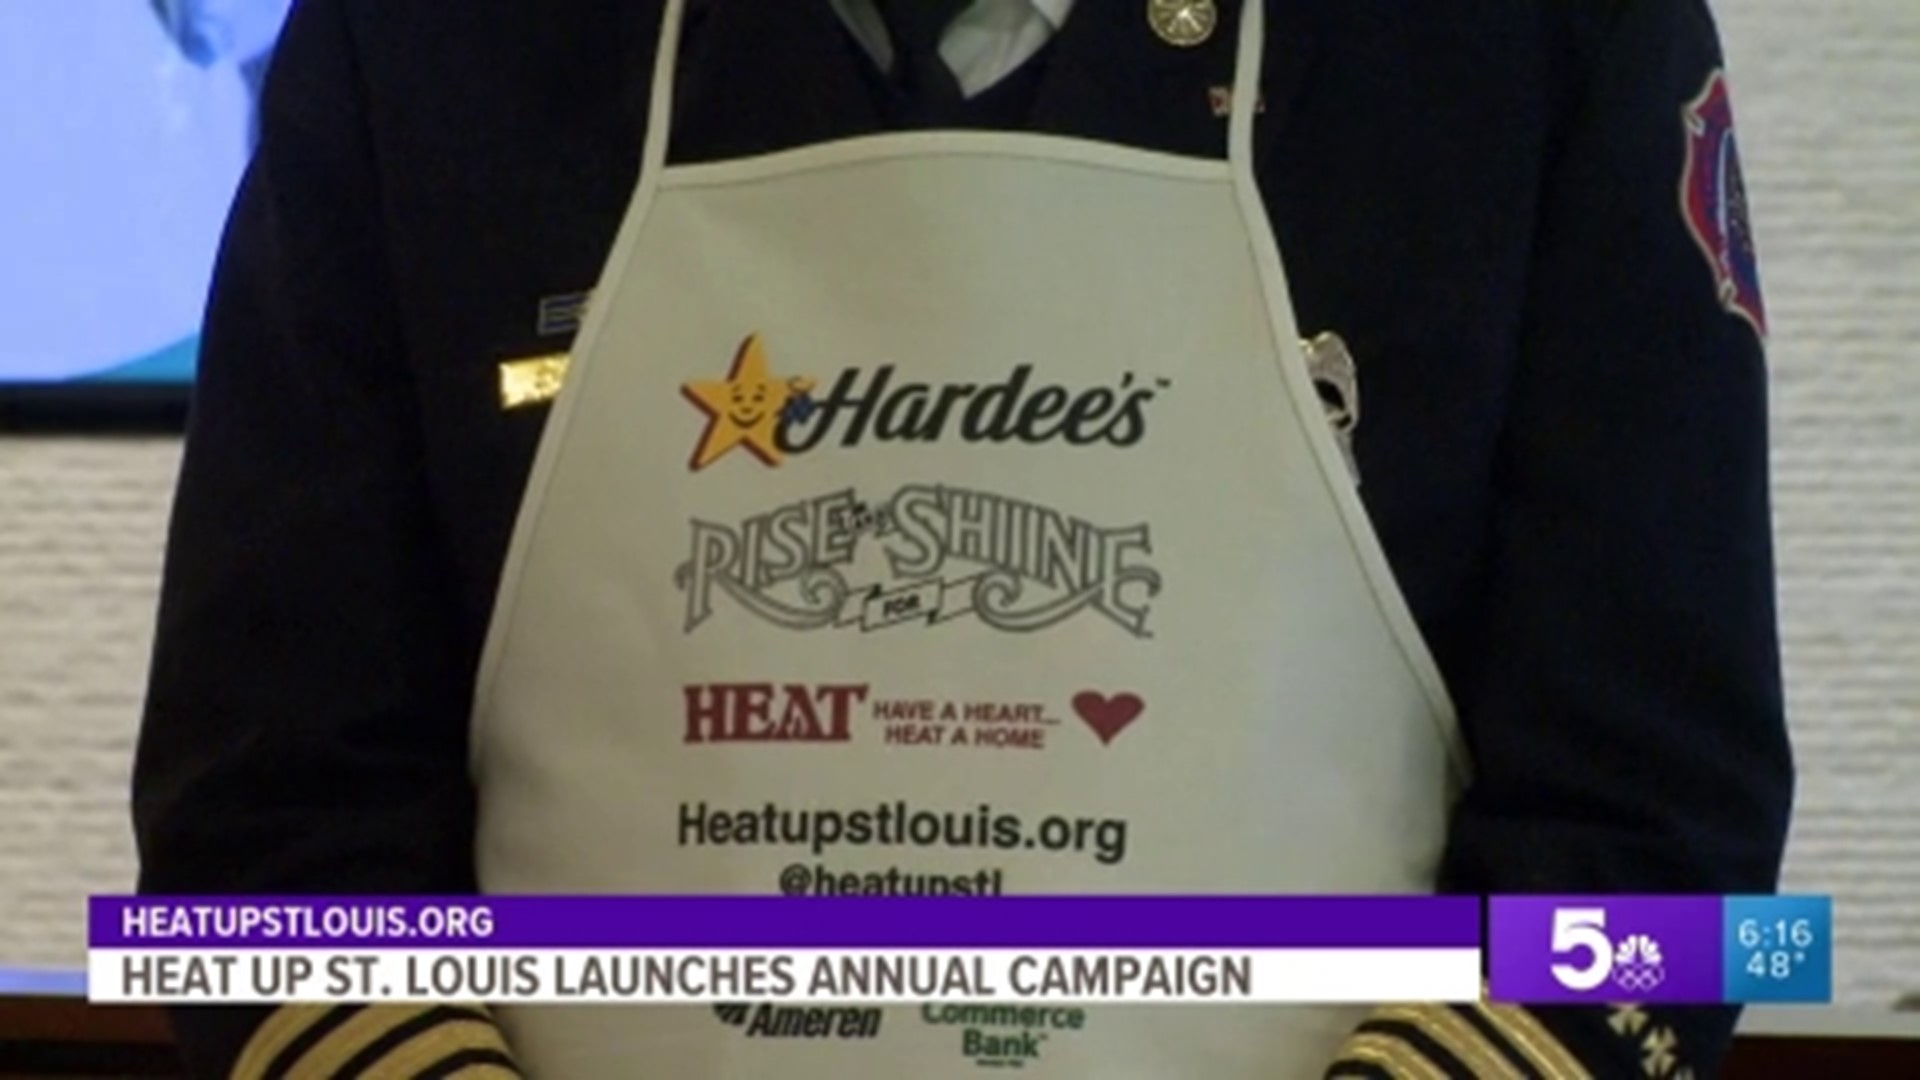 HeatUpStLouis.org is launching its annual campaign to help pay for home heating. Here's how you can get involved.